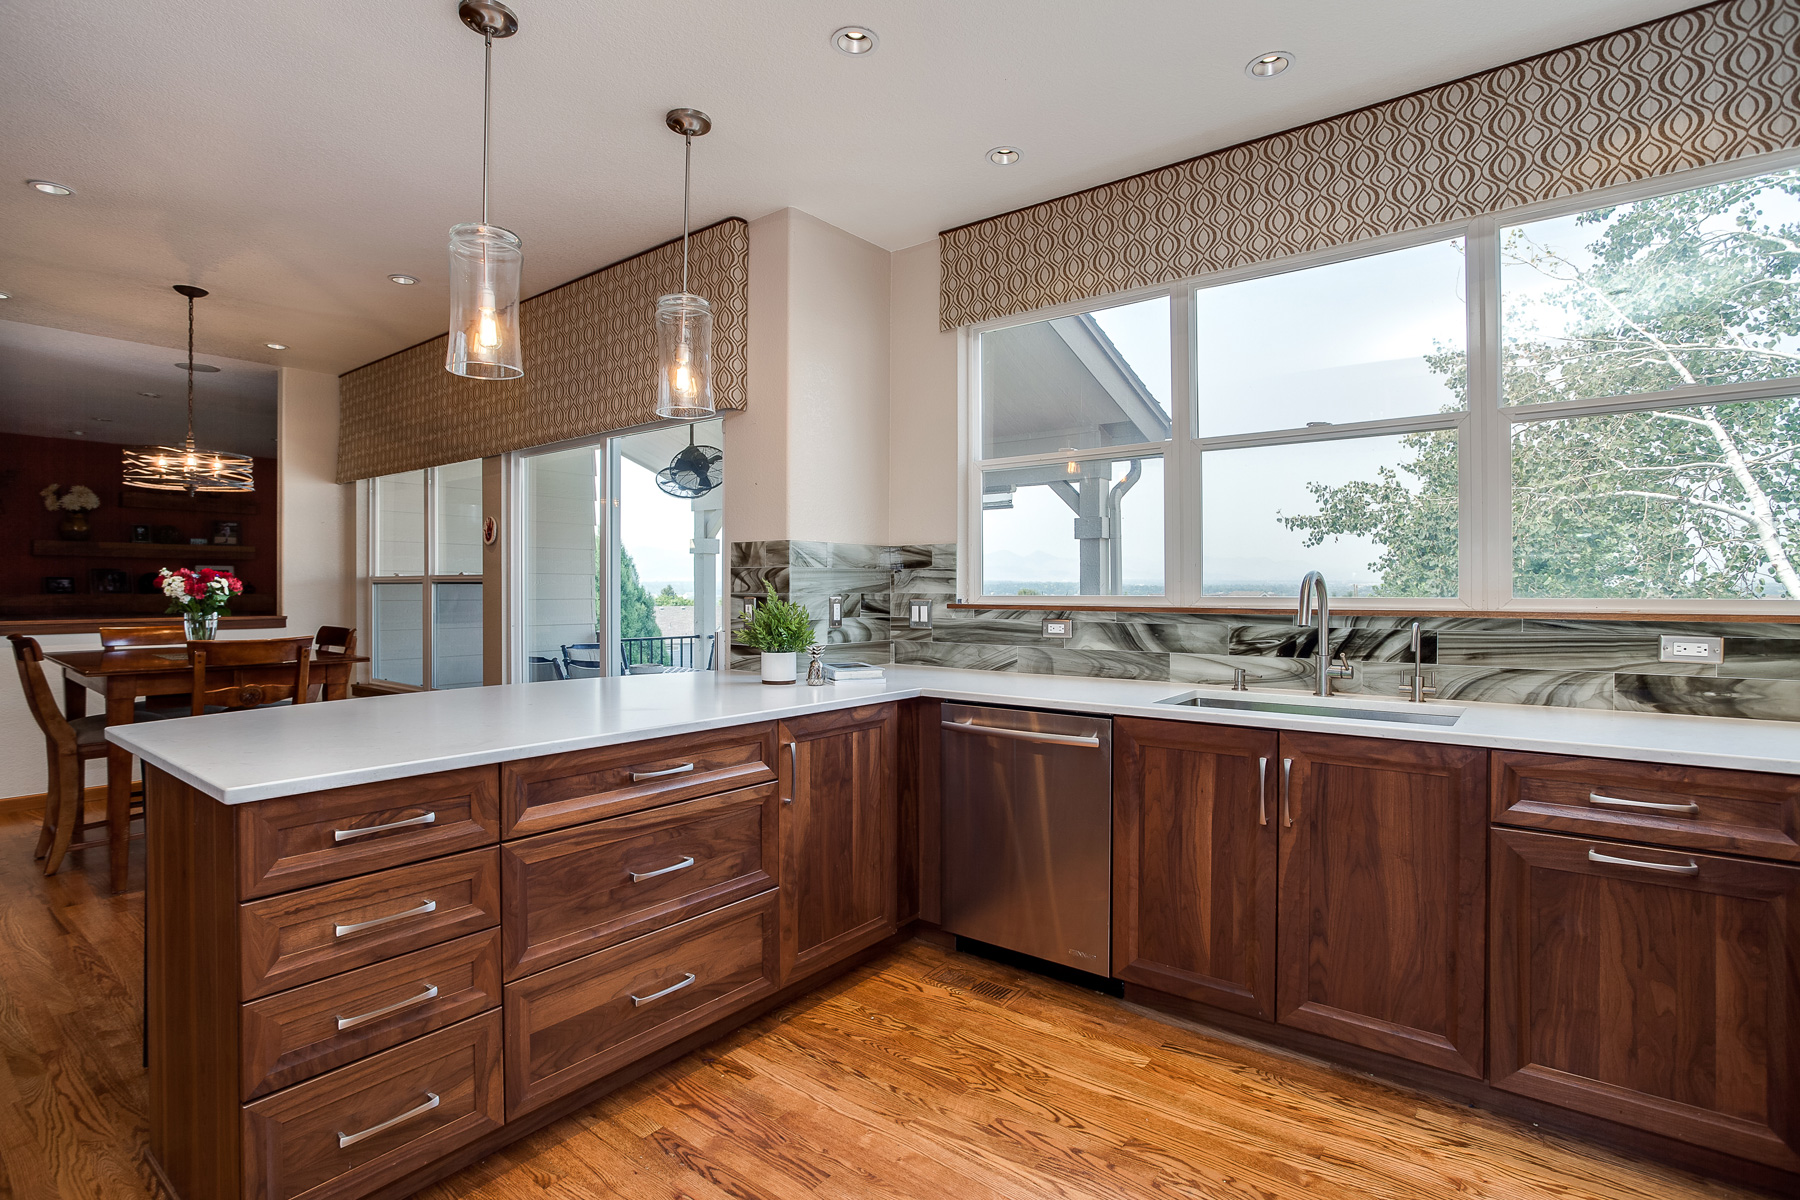 Upgrade Your Kitchen with Stunning White Cabinets and Walnut ...